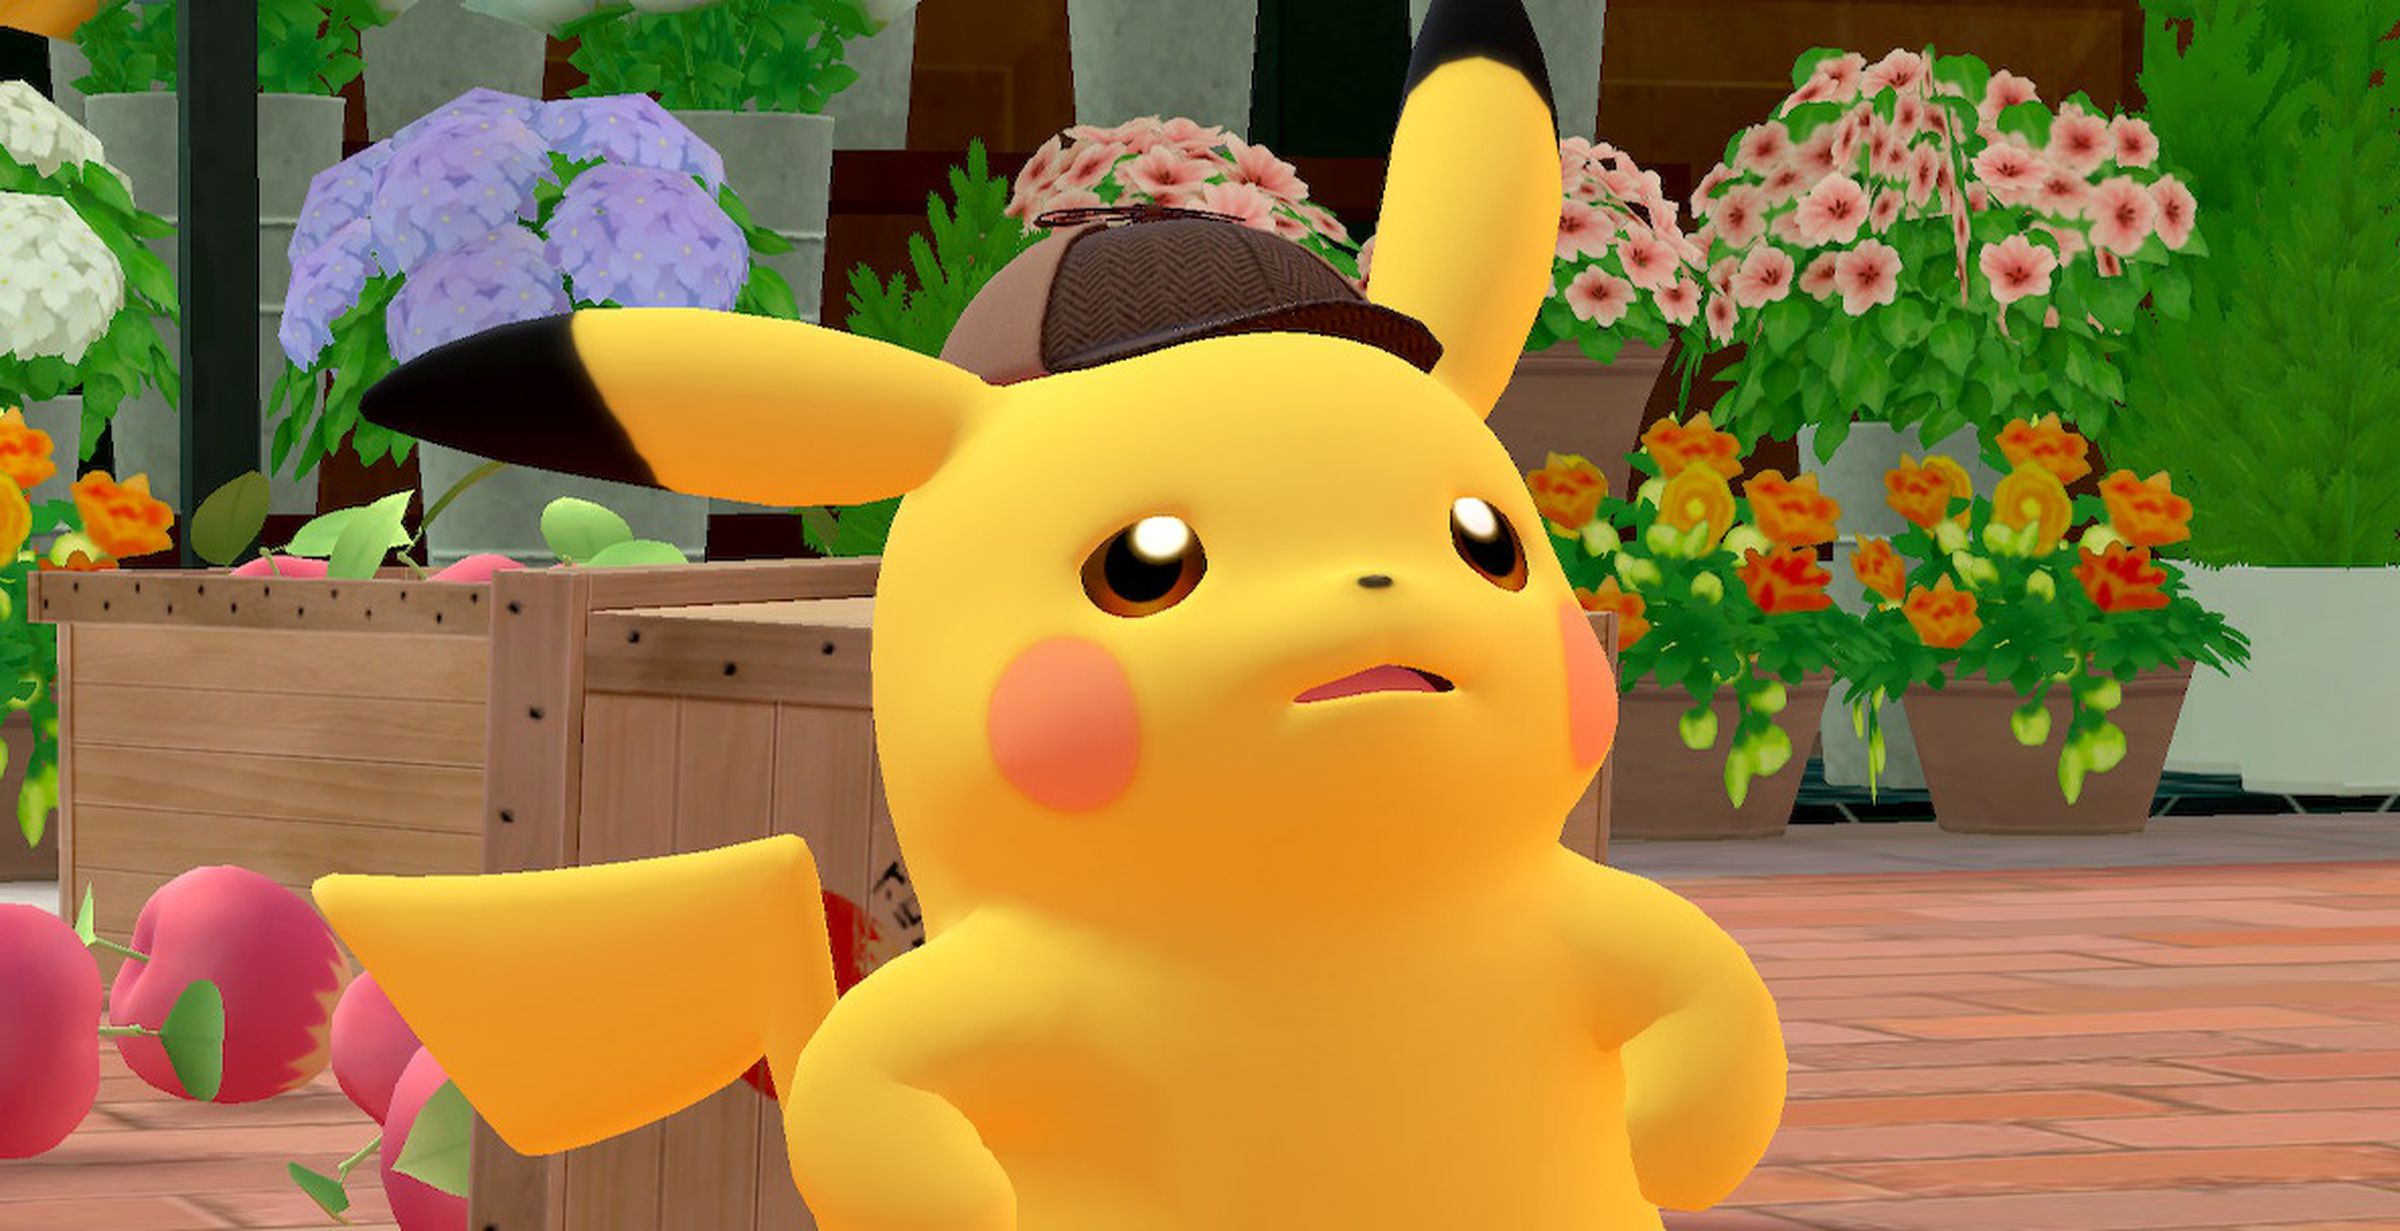 Detective Pikachu Returns is a super effective story let down by dated visuals